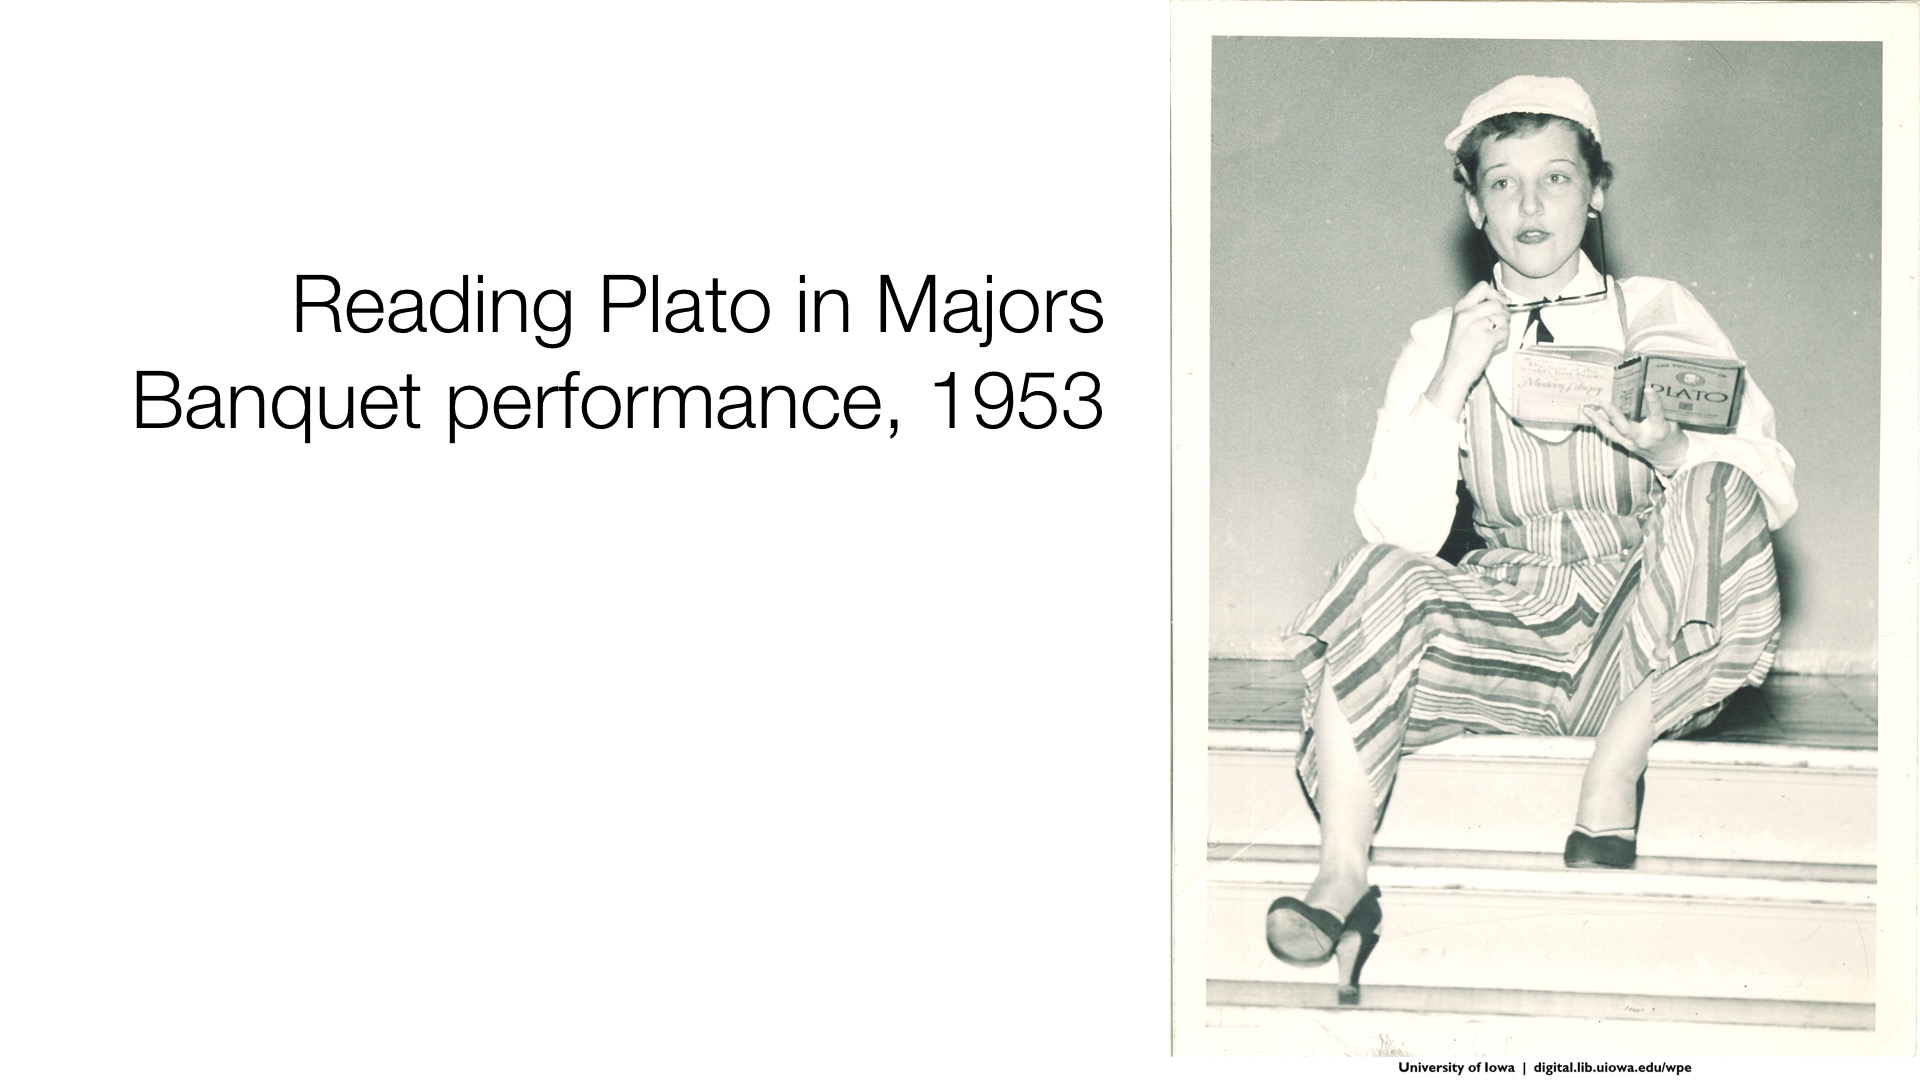 reading plato in majors banquet performance, 1953